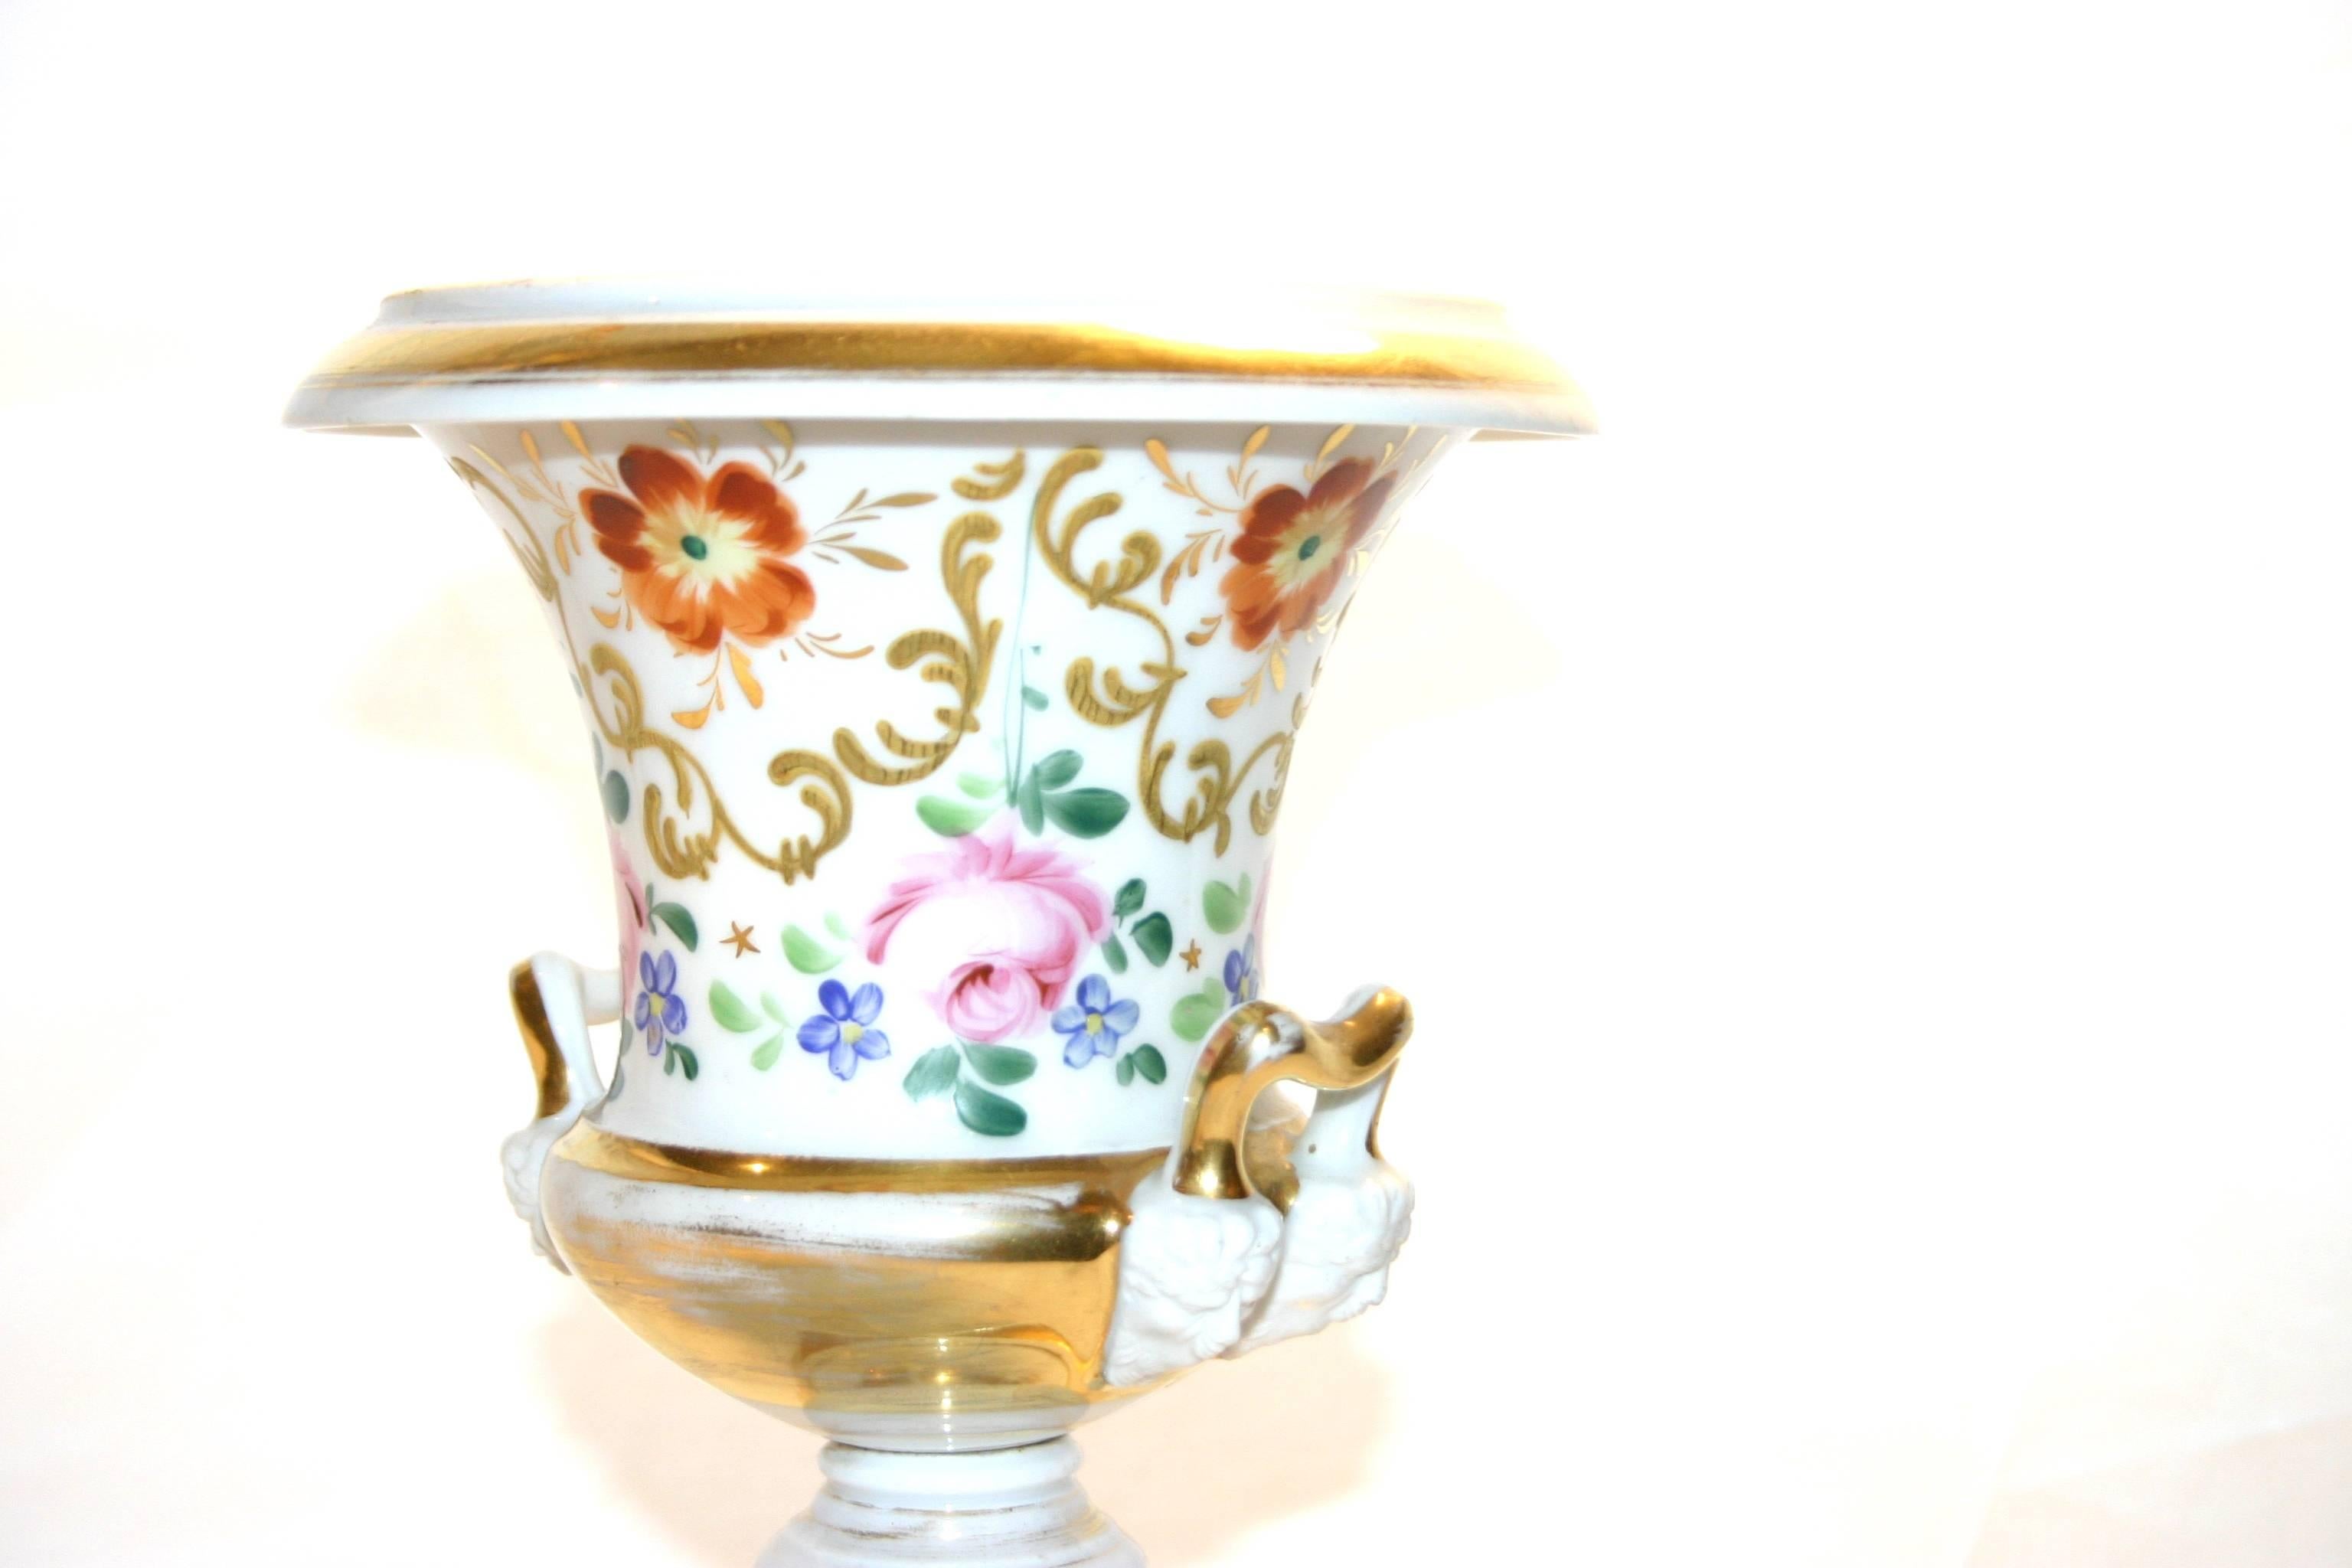 Early 19th century old Paris porcelain vase, hand-painted floral detailing and gilt gold design details on a white base.
Measures:
8.5